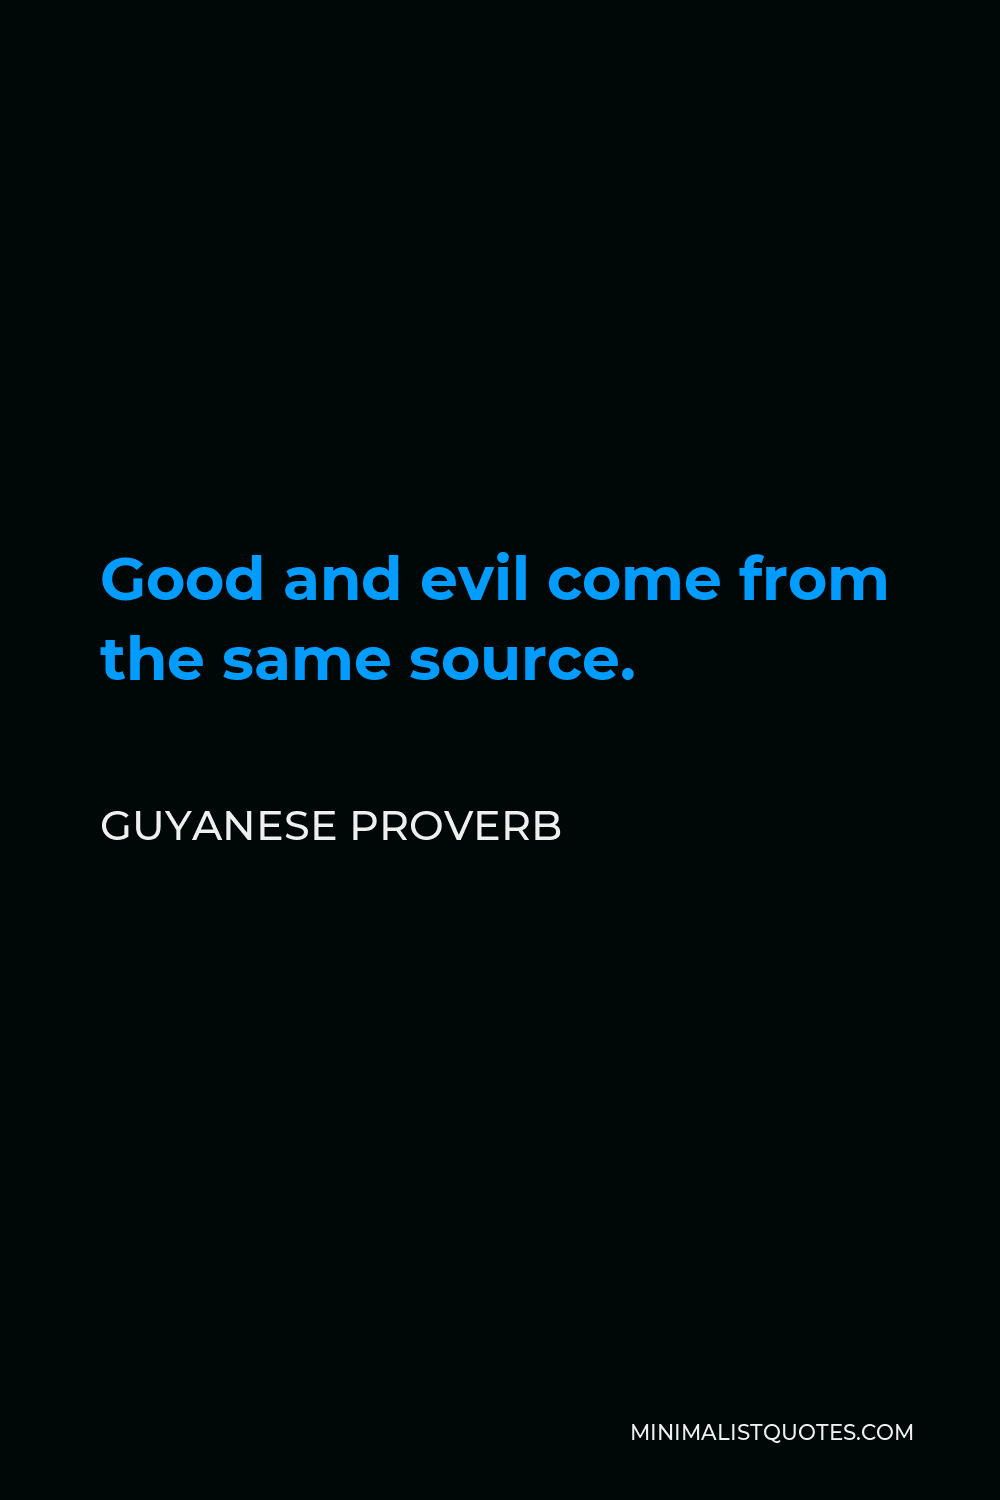 Guyanese Proverb Quote - Good and evil come from the same source.